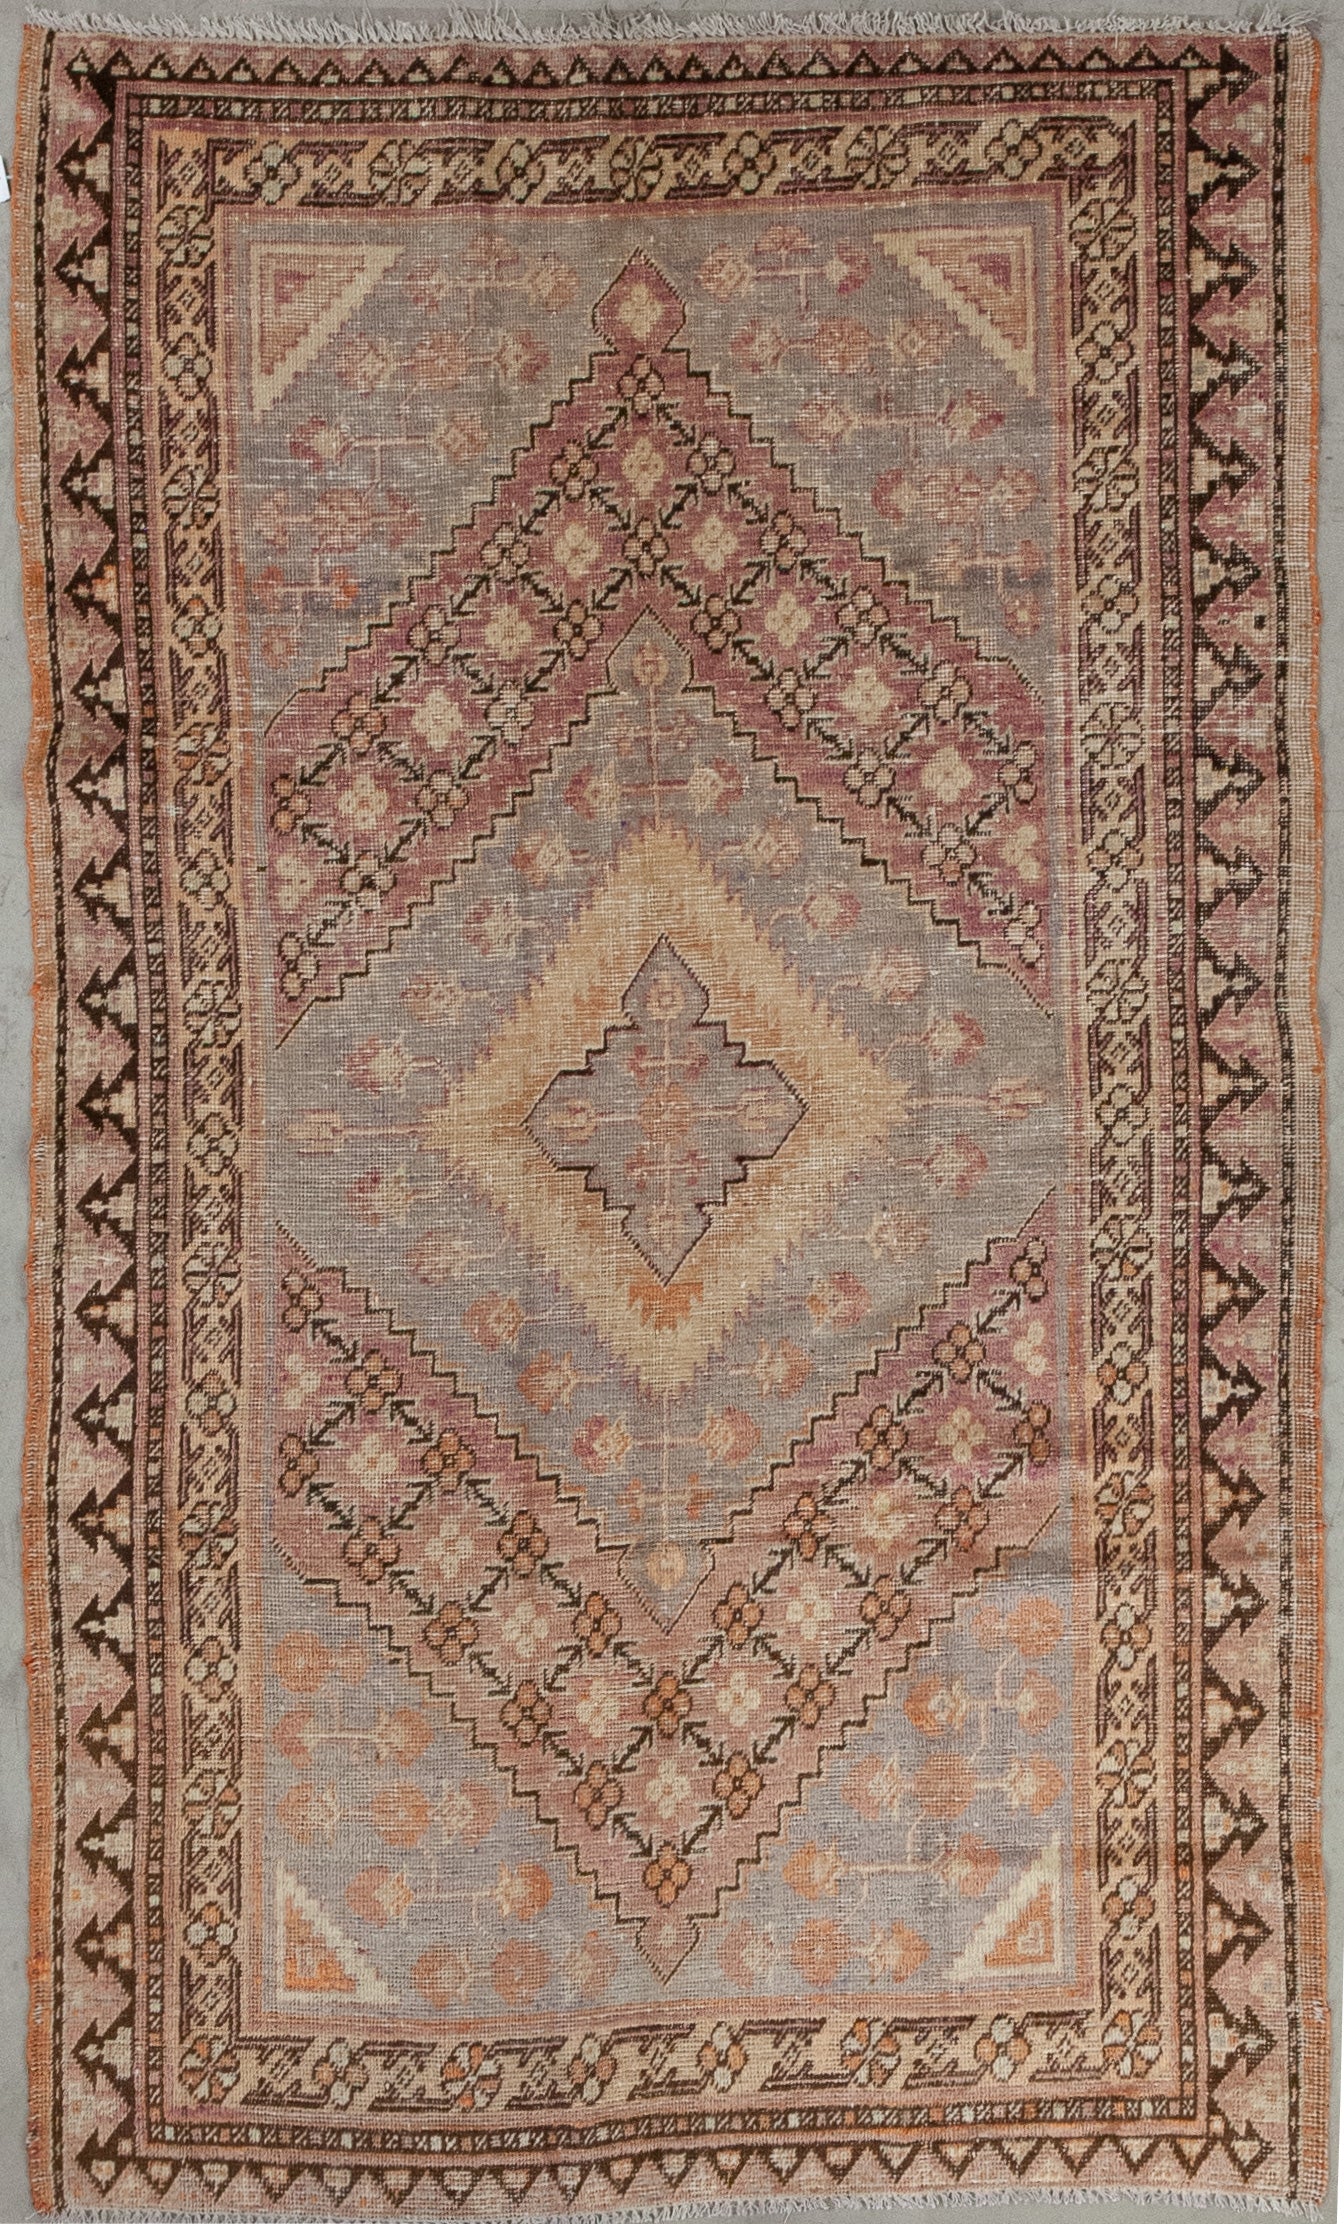 This decorous rug was woven with a solid color scheme which has brown as the dominant tone, black, burgundy, beige, and gray. The design features rhombuses' shapes mainly.